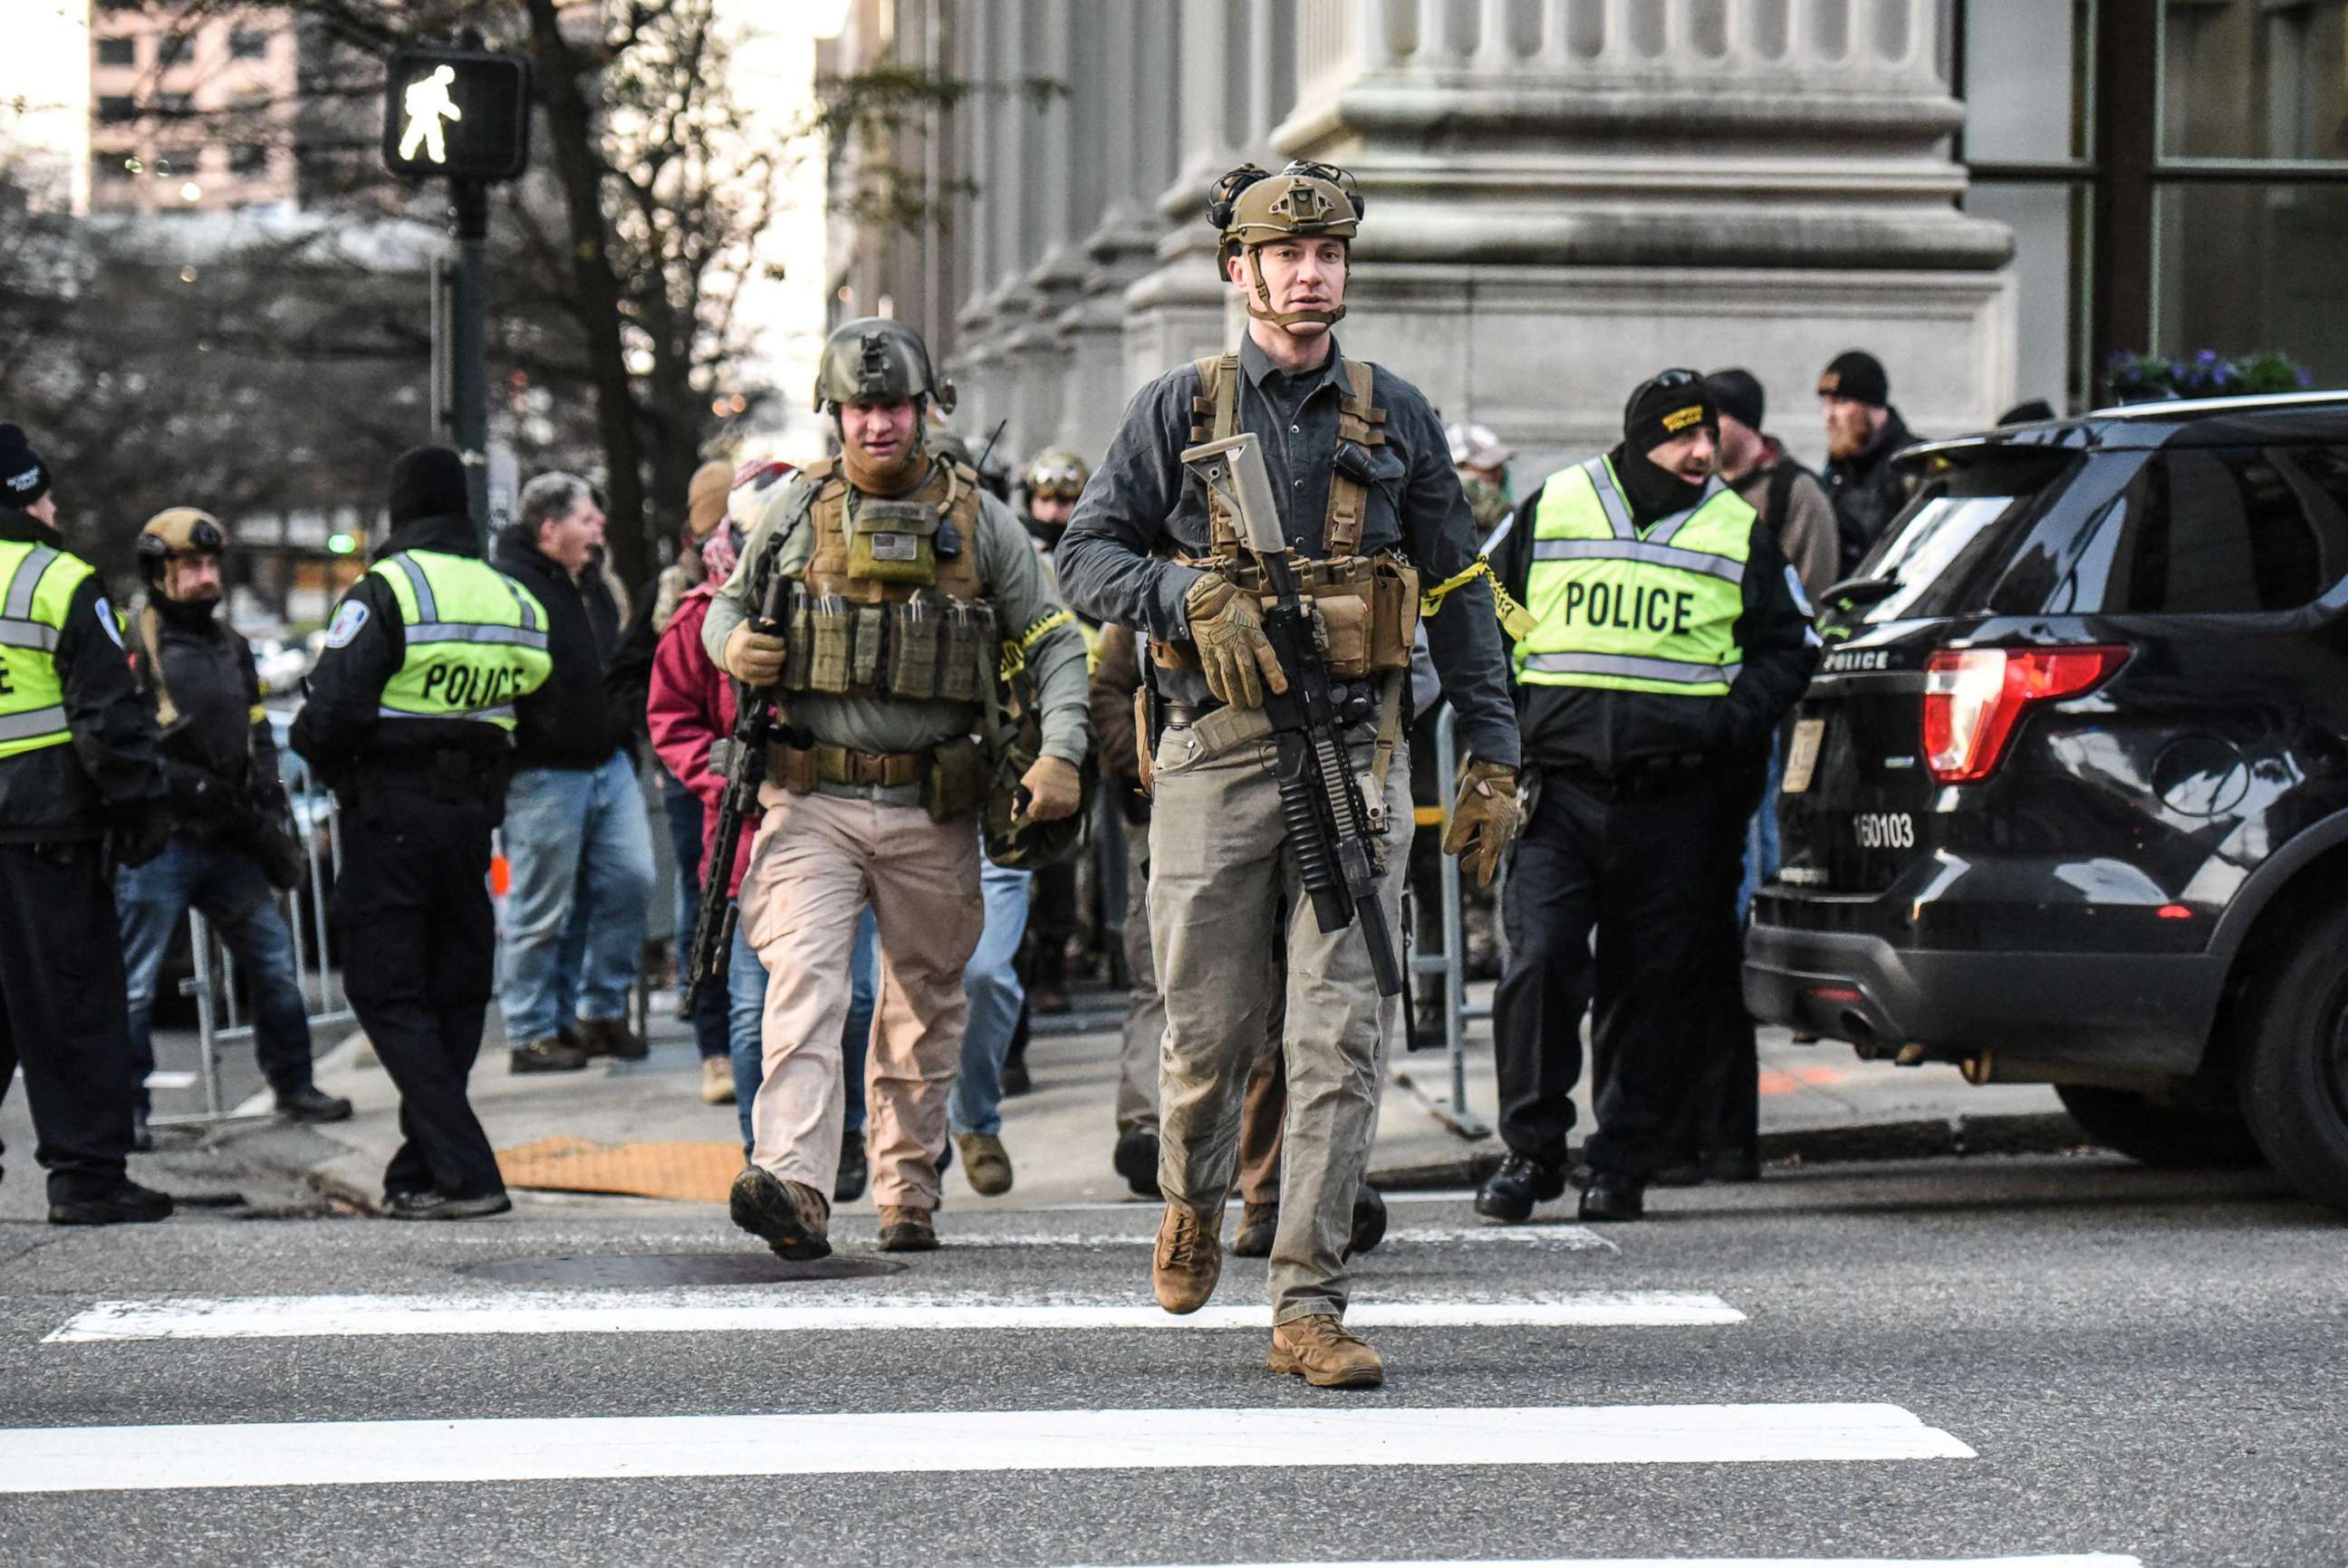 PHOTO: People who are part of an armed militia group walk near the Virginia State Capitol building to advocate for gun rights in Richmond, Va., Jan. 20, 2020. 